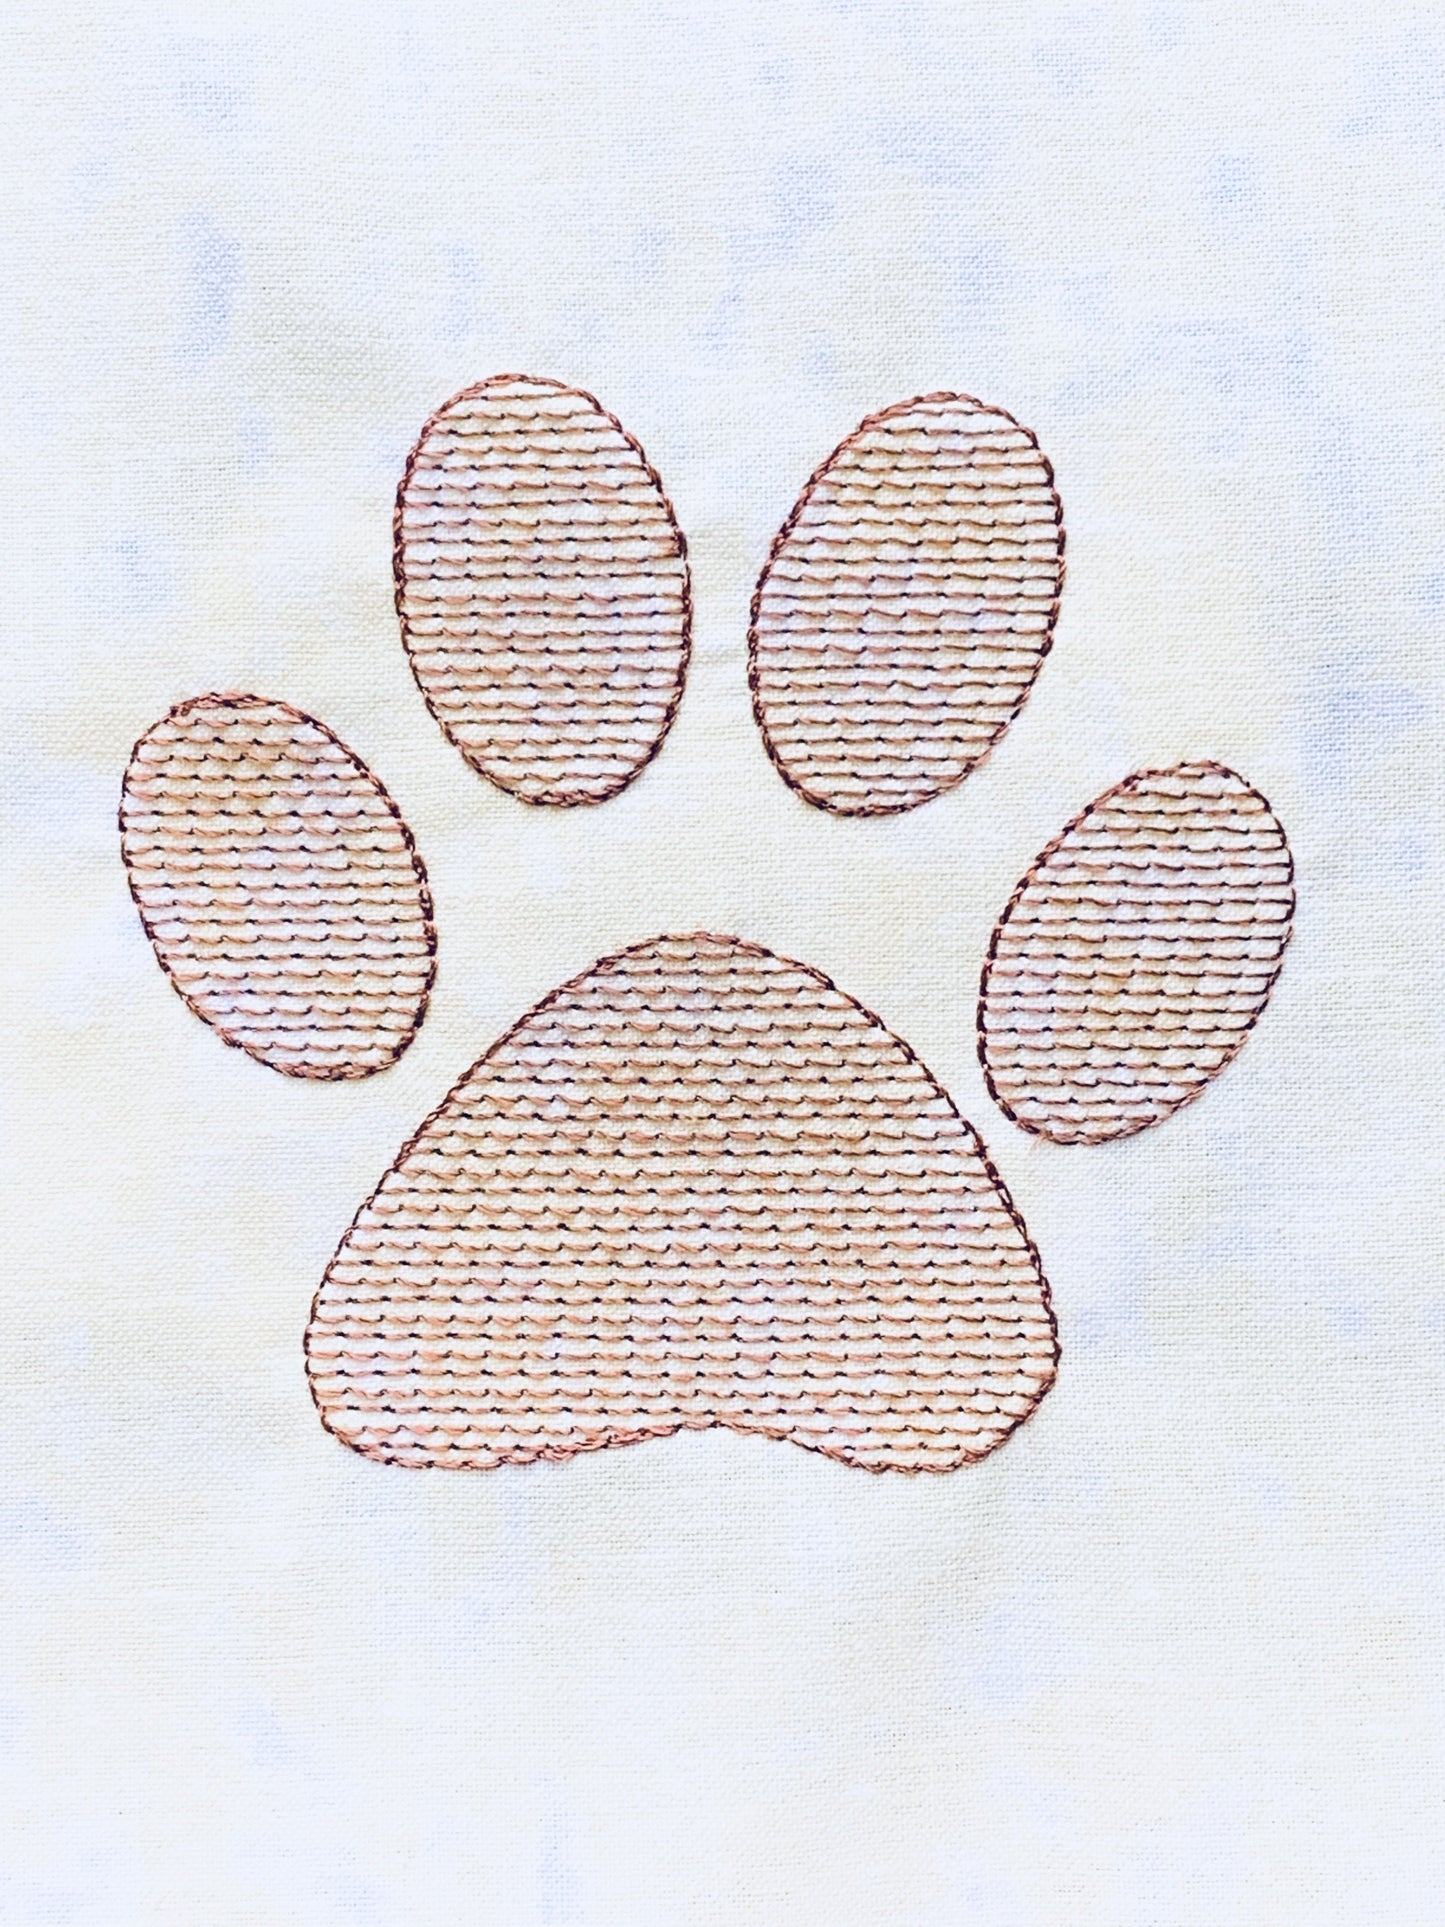 Paw Print - Machine Embroidery Design - 4x4 Hoop - FREE DOWNLOAD - Beachside Knits N Quilts